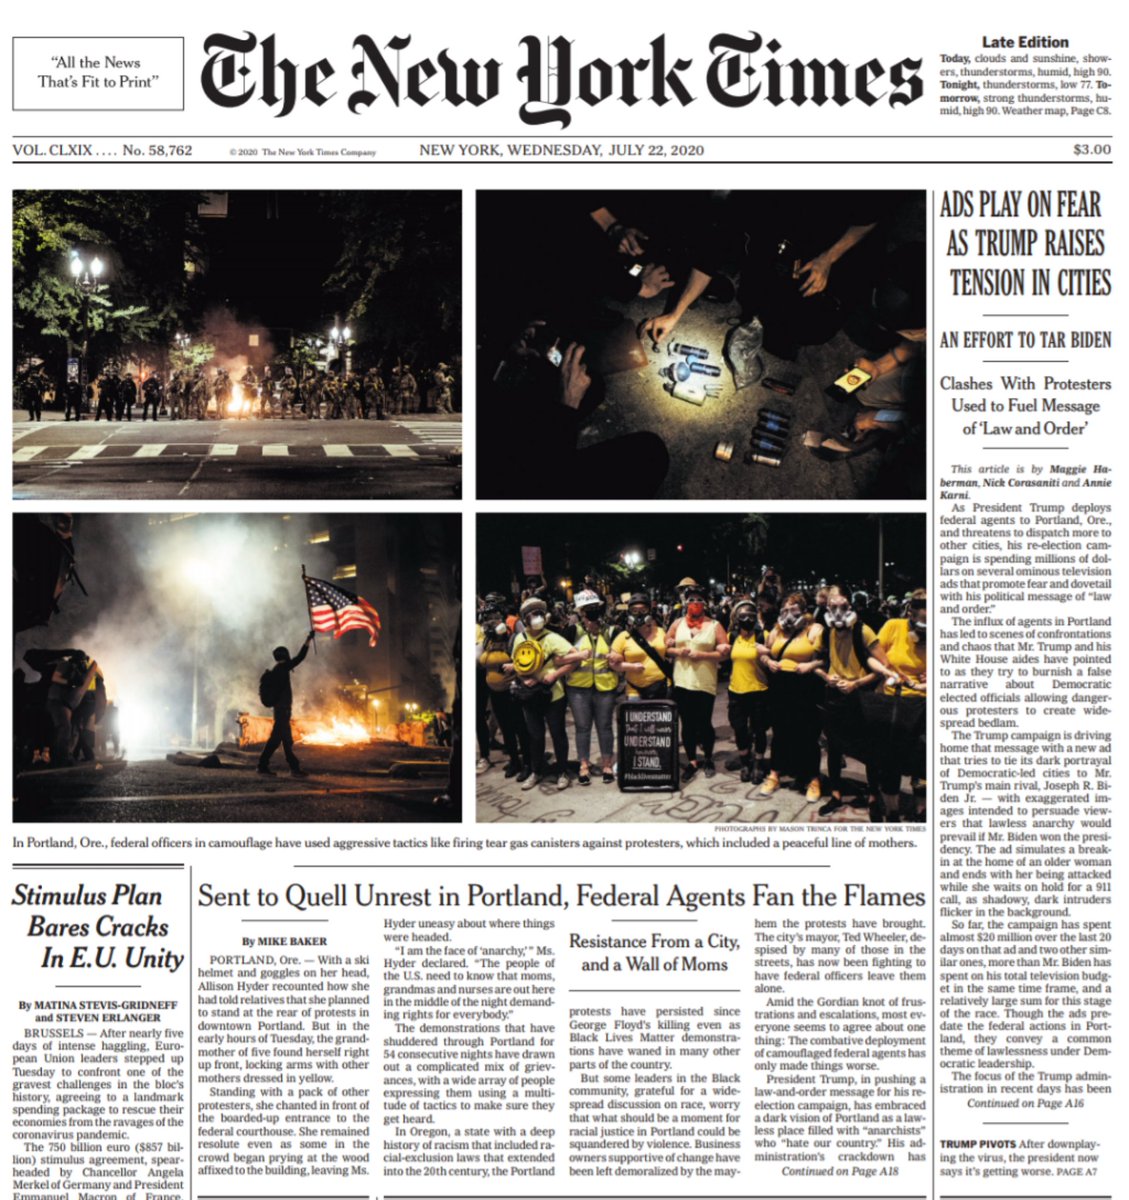 Here's a preview of tomorrow's New York Times front page.Sent to Quell Unrest in Portland, Federal Agents Fan the FlamesStory:  https://www.nytimes.com/2020/07/21/us/portland-protests.html